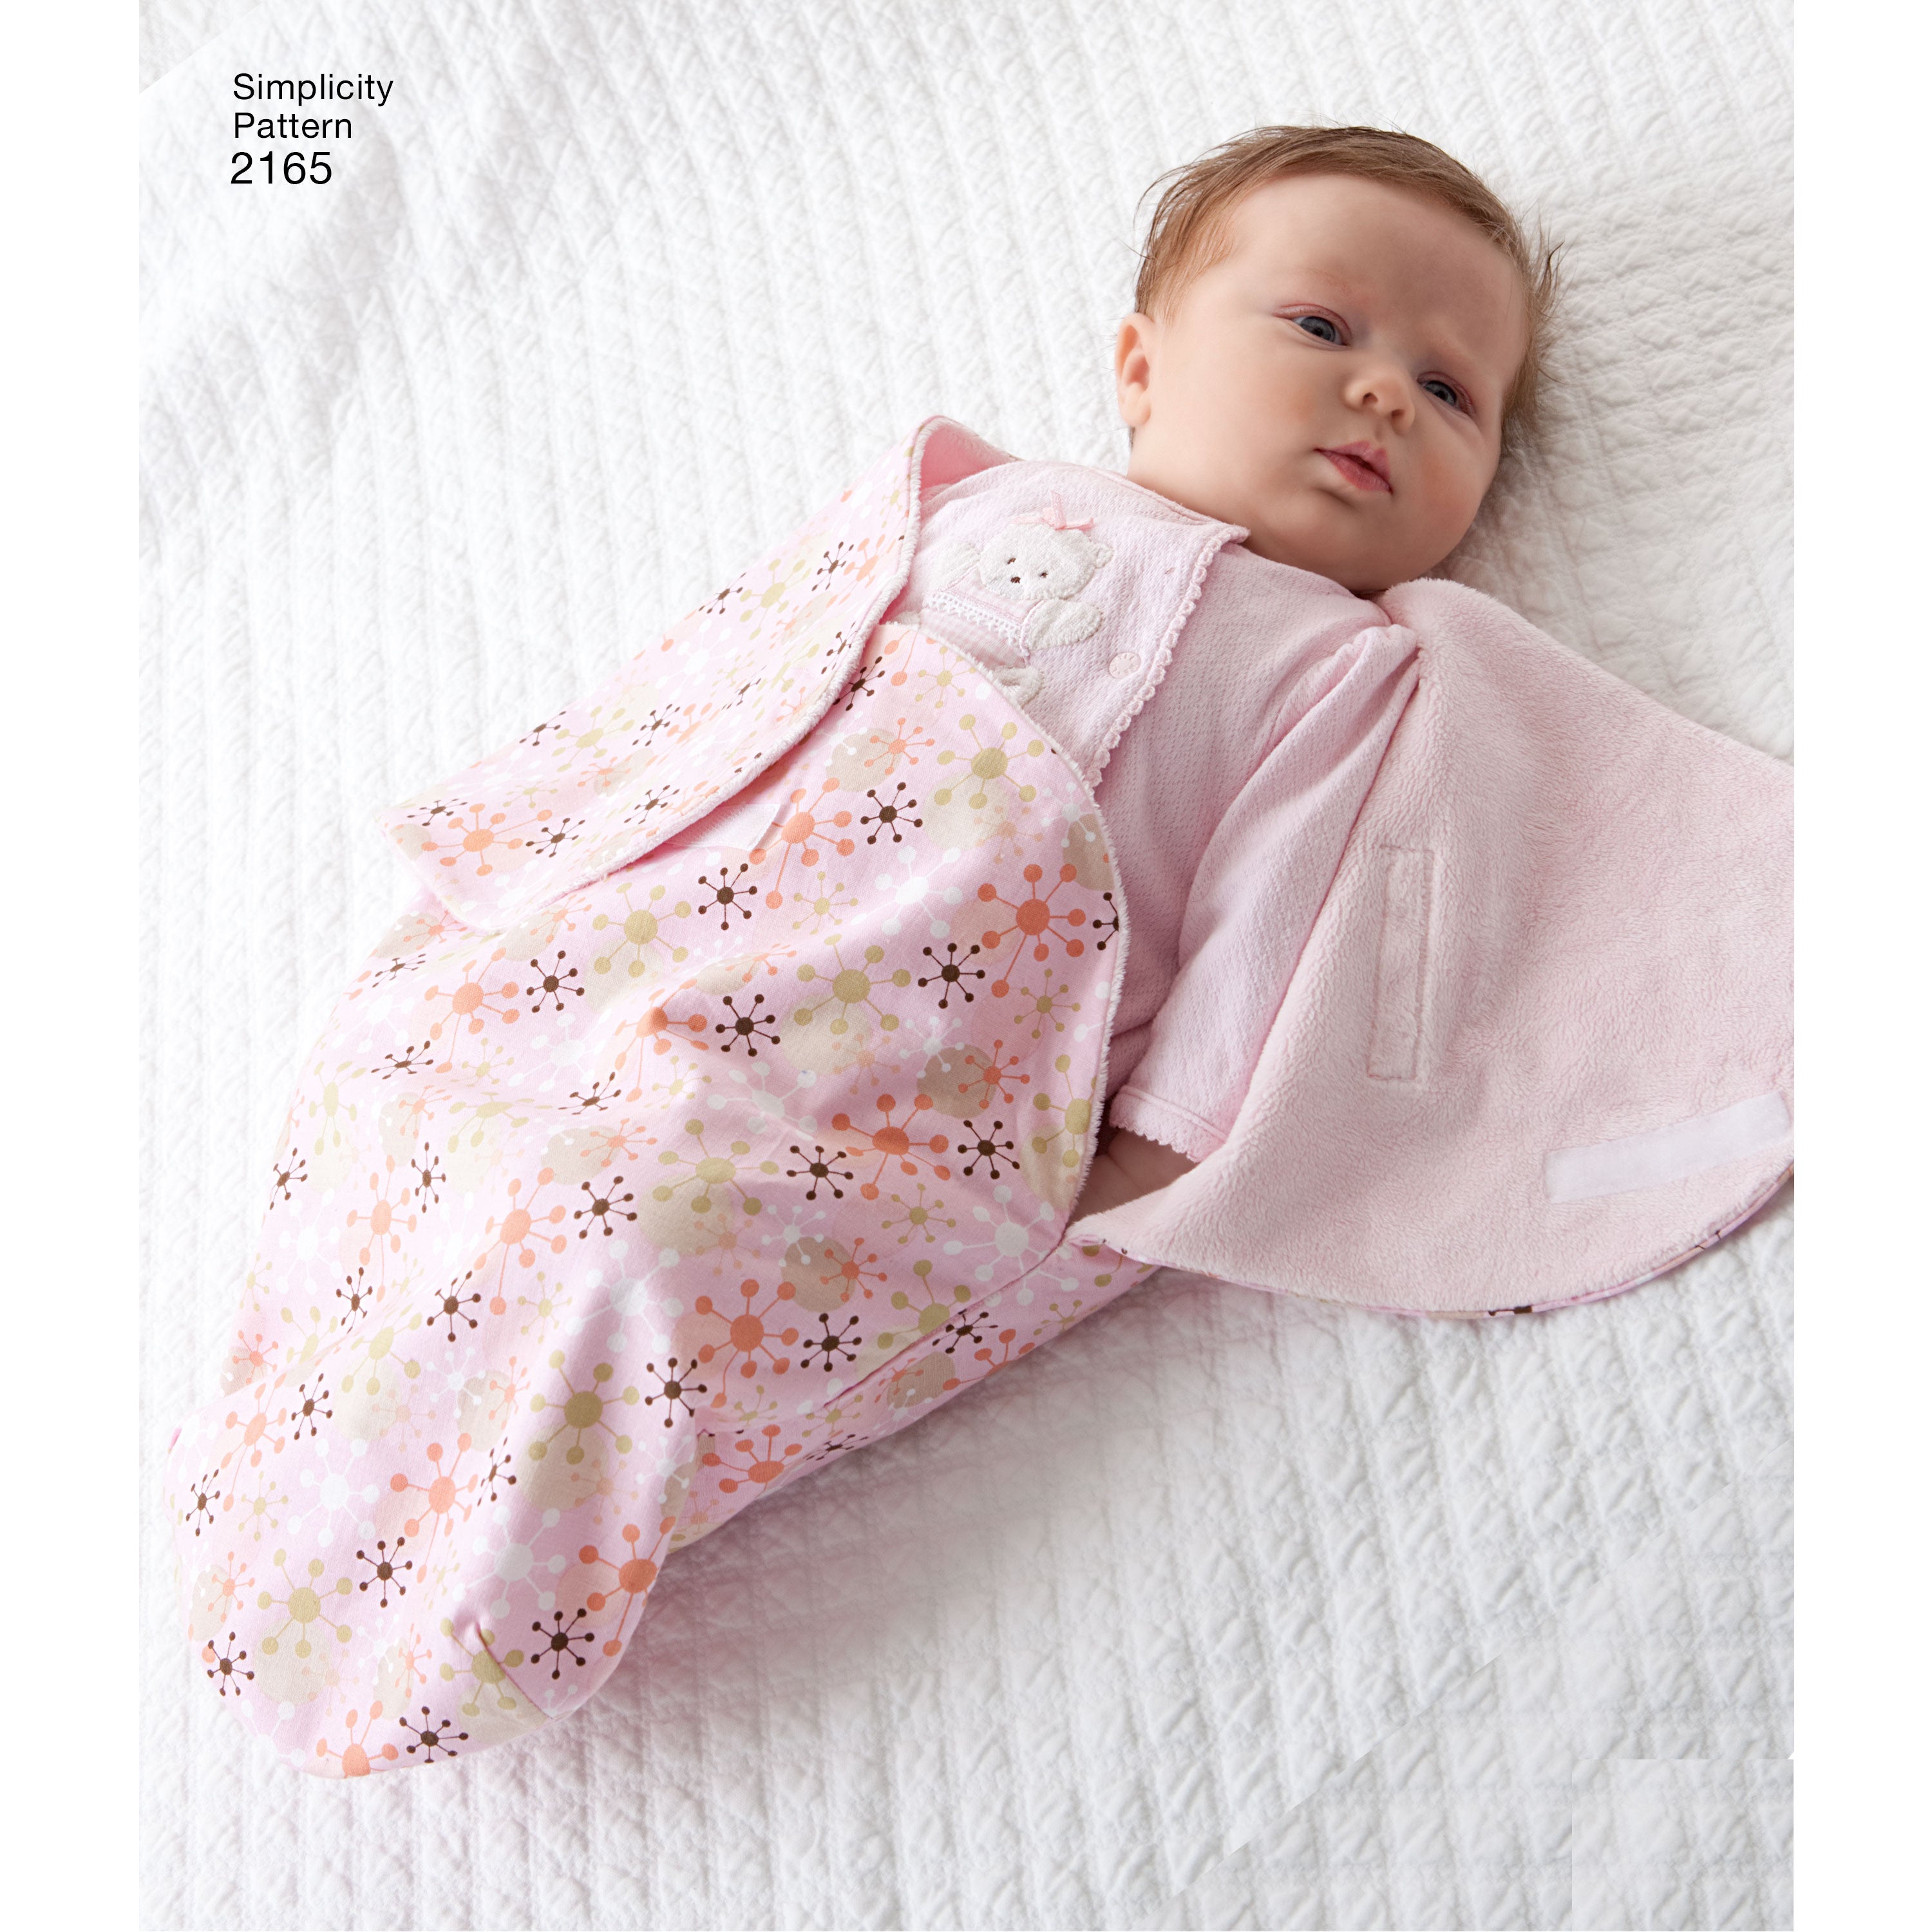 Simplicity Pattern 2165 Baby Accessories | designed by Teri from Jaycotts Sewing Supplies